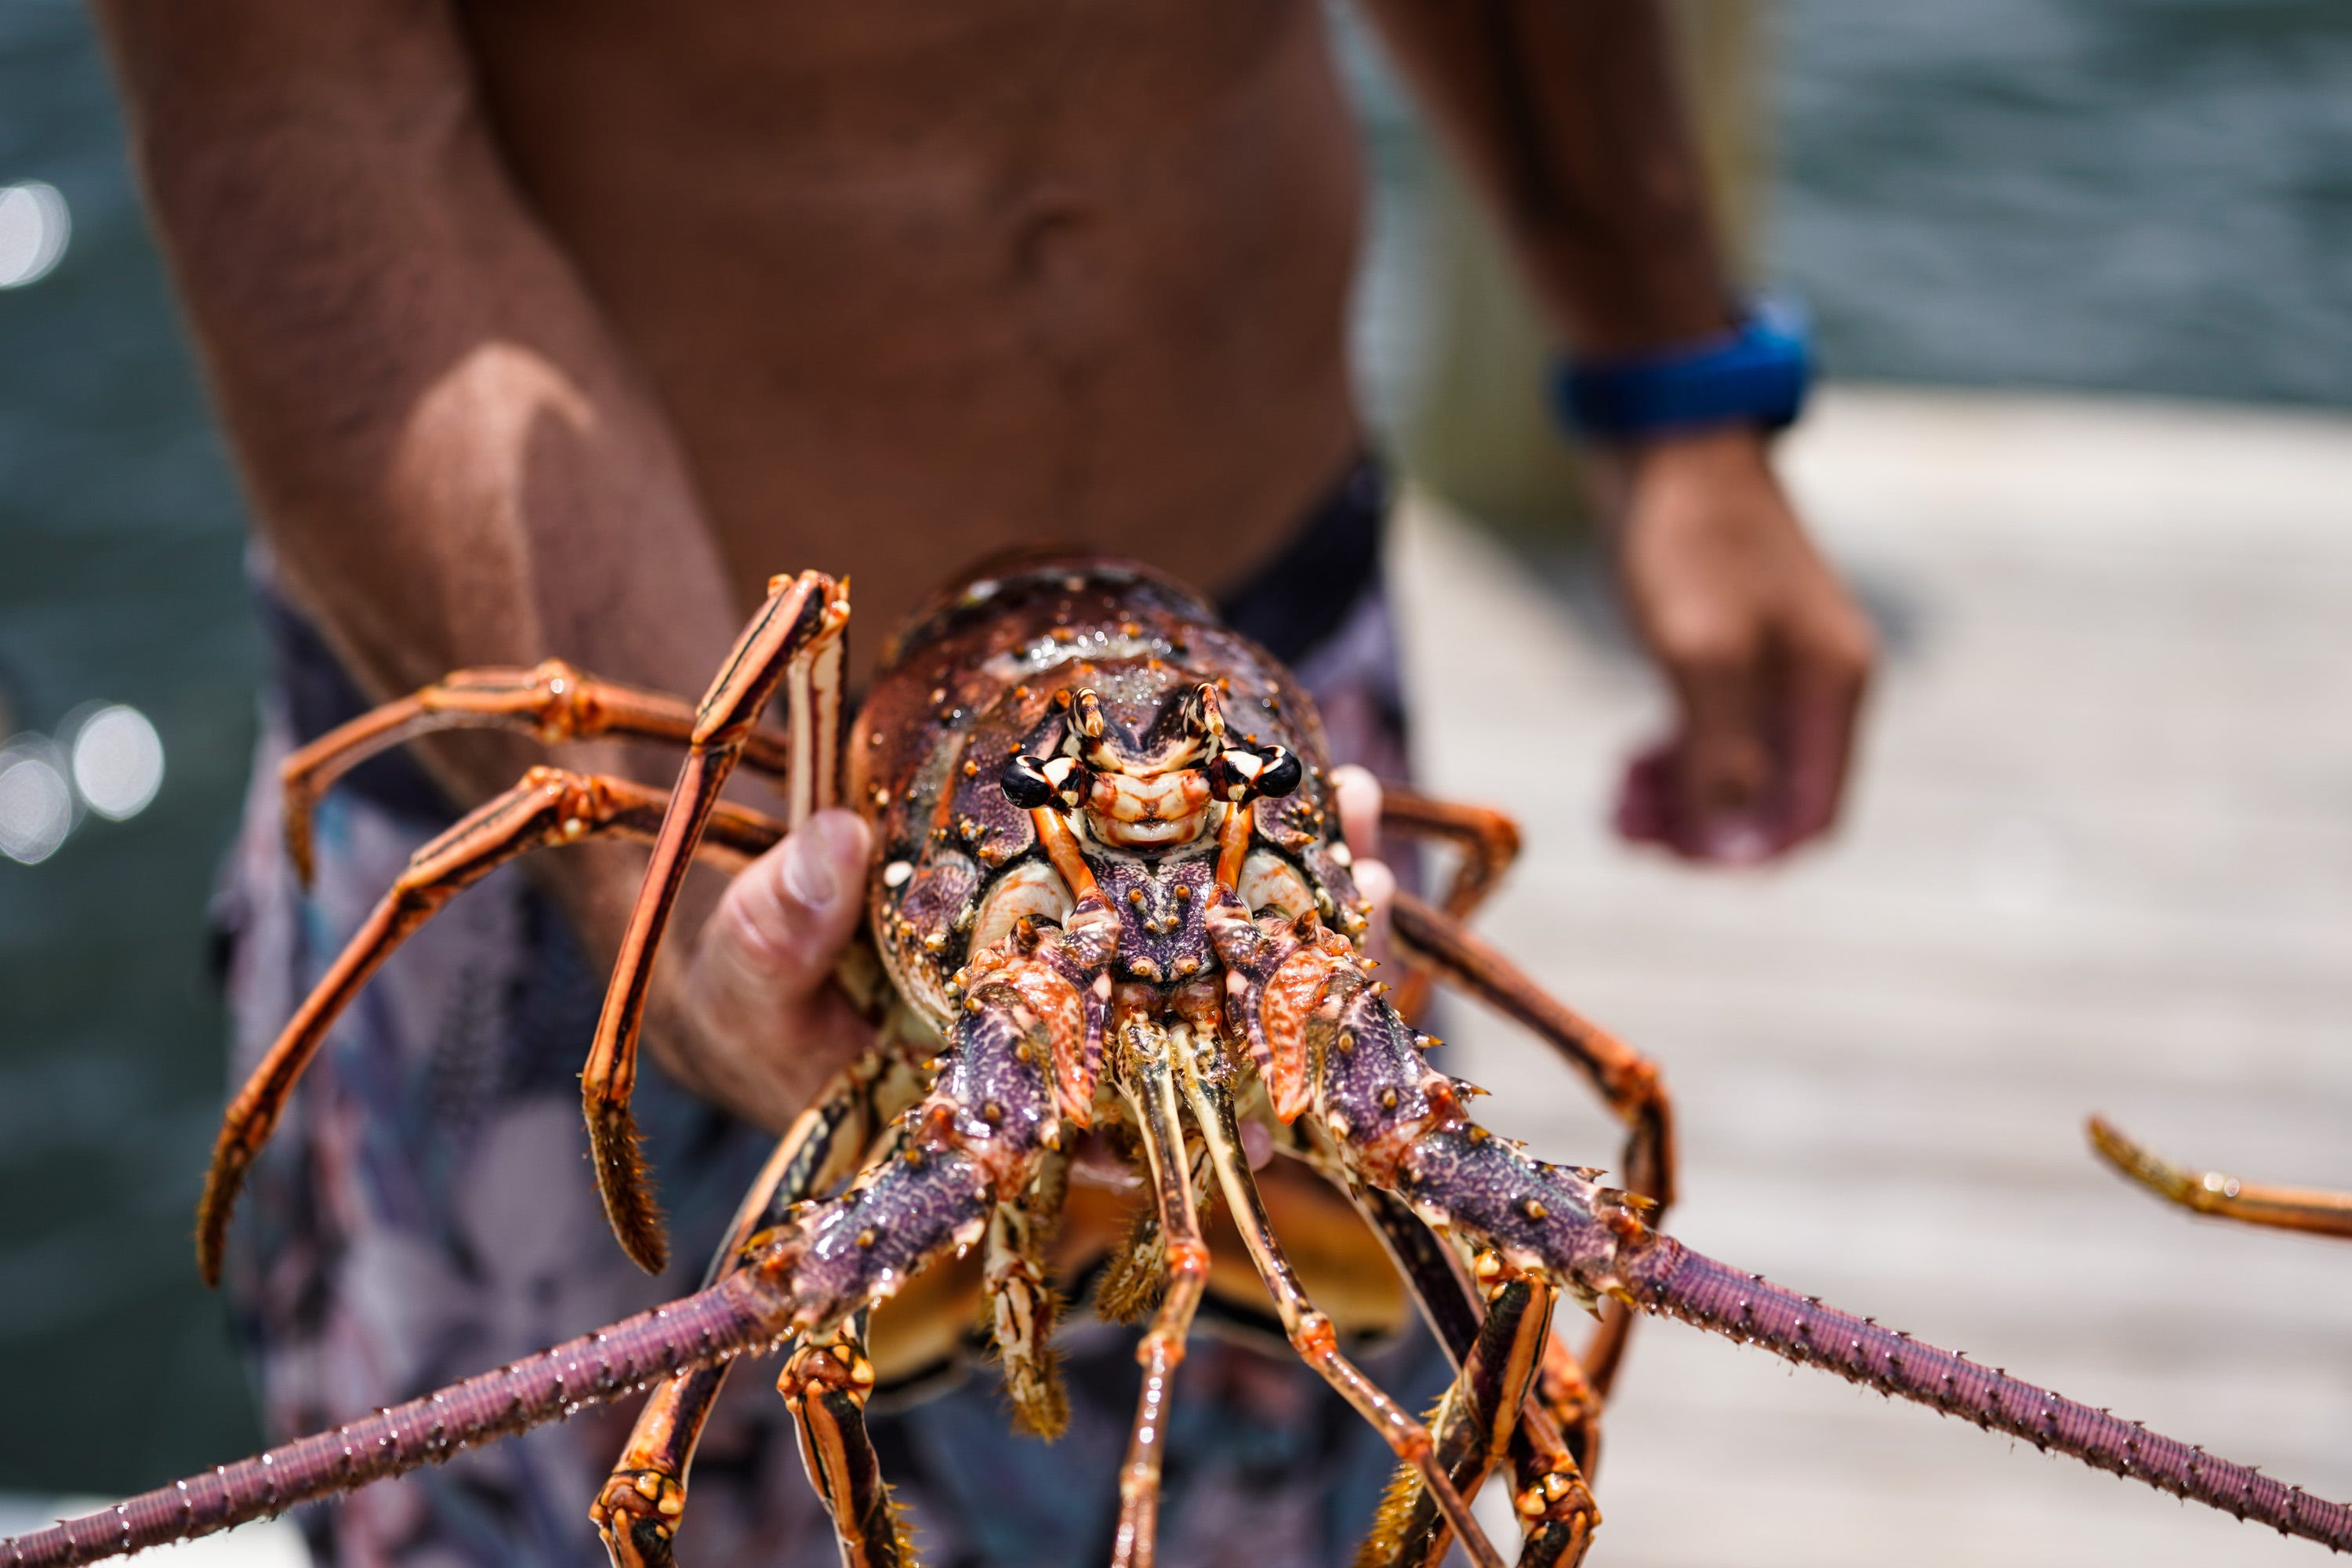 Florida spiny lobster miniseason 2022 opens. Here's what to know.